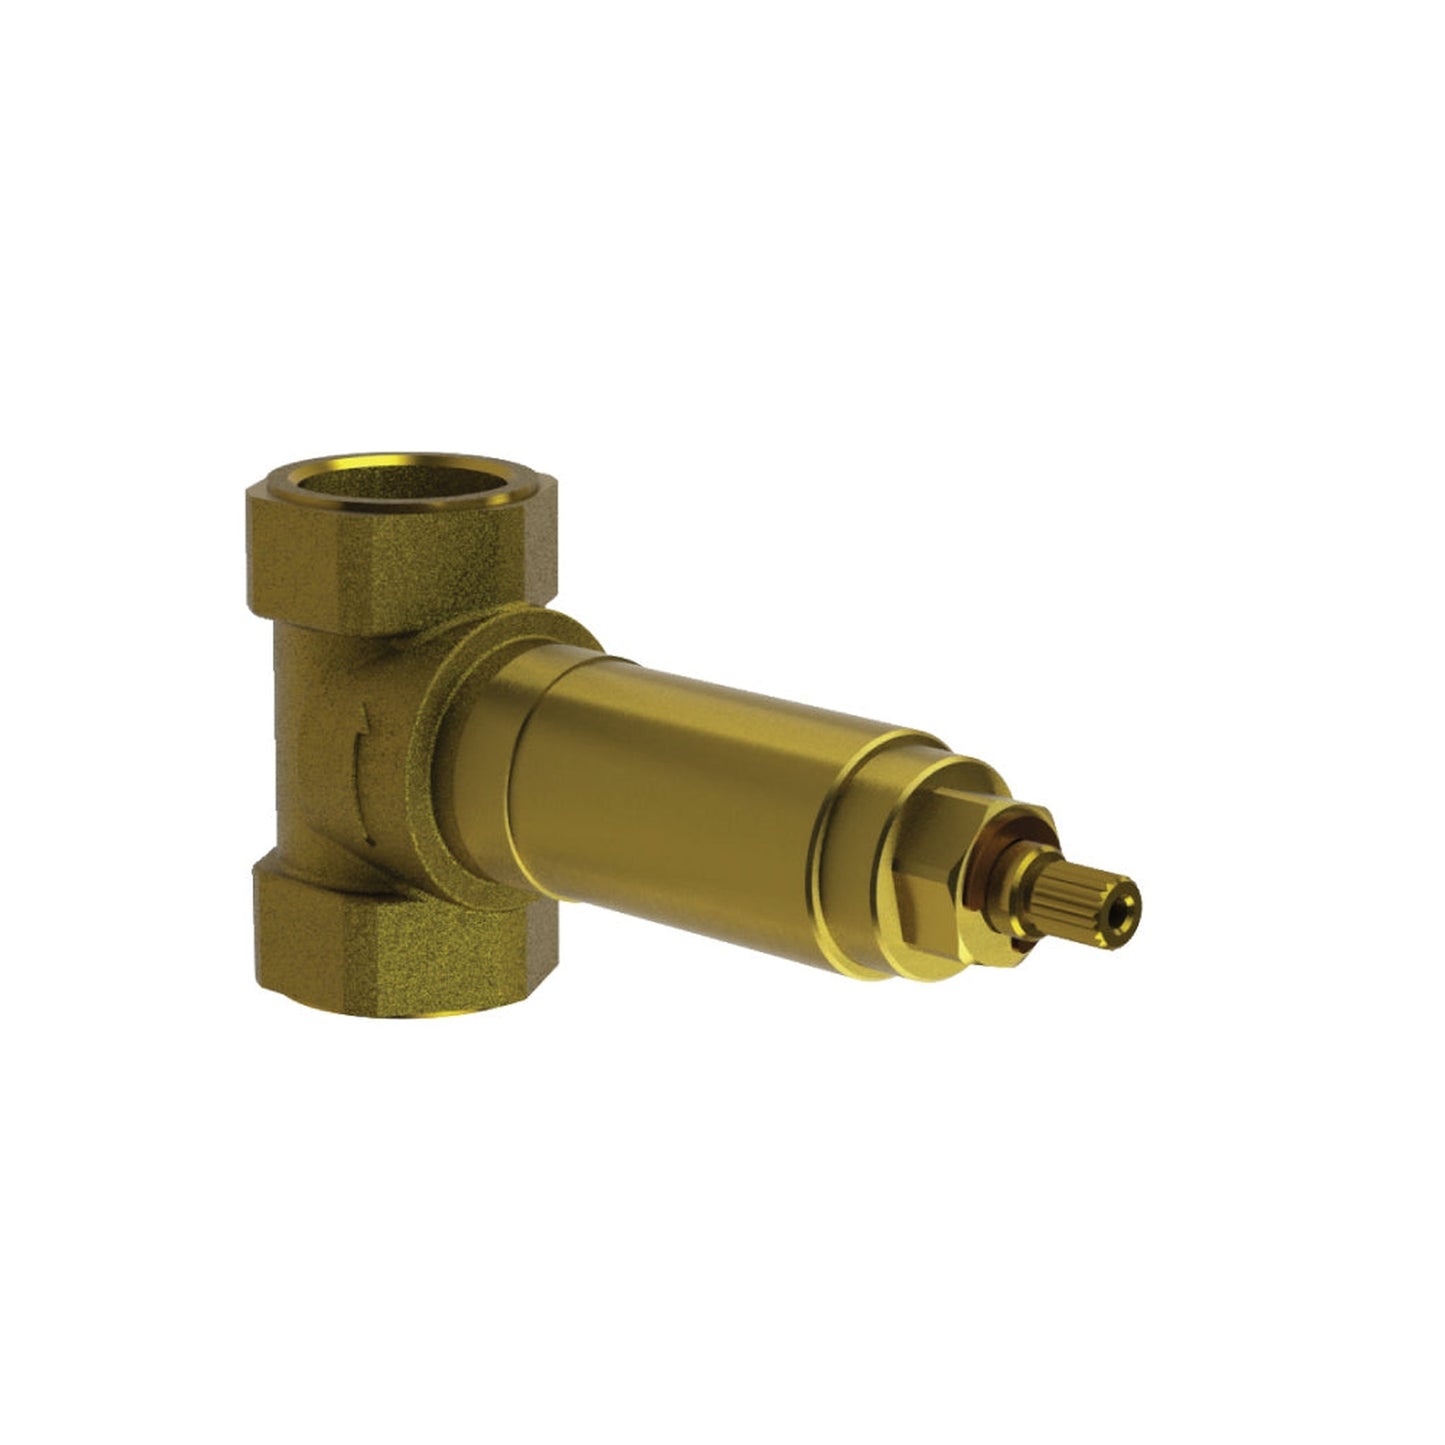 Isenberg Serie 196 3" Satin Brass PVD Wall Mounted Shower Faucet Trim With 0.75" Single-Output NPT Female Connection Volume Control Valve